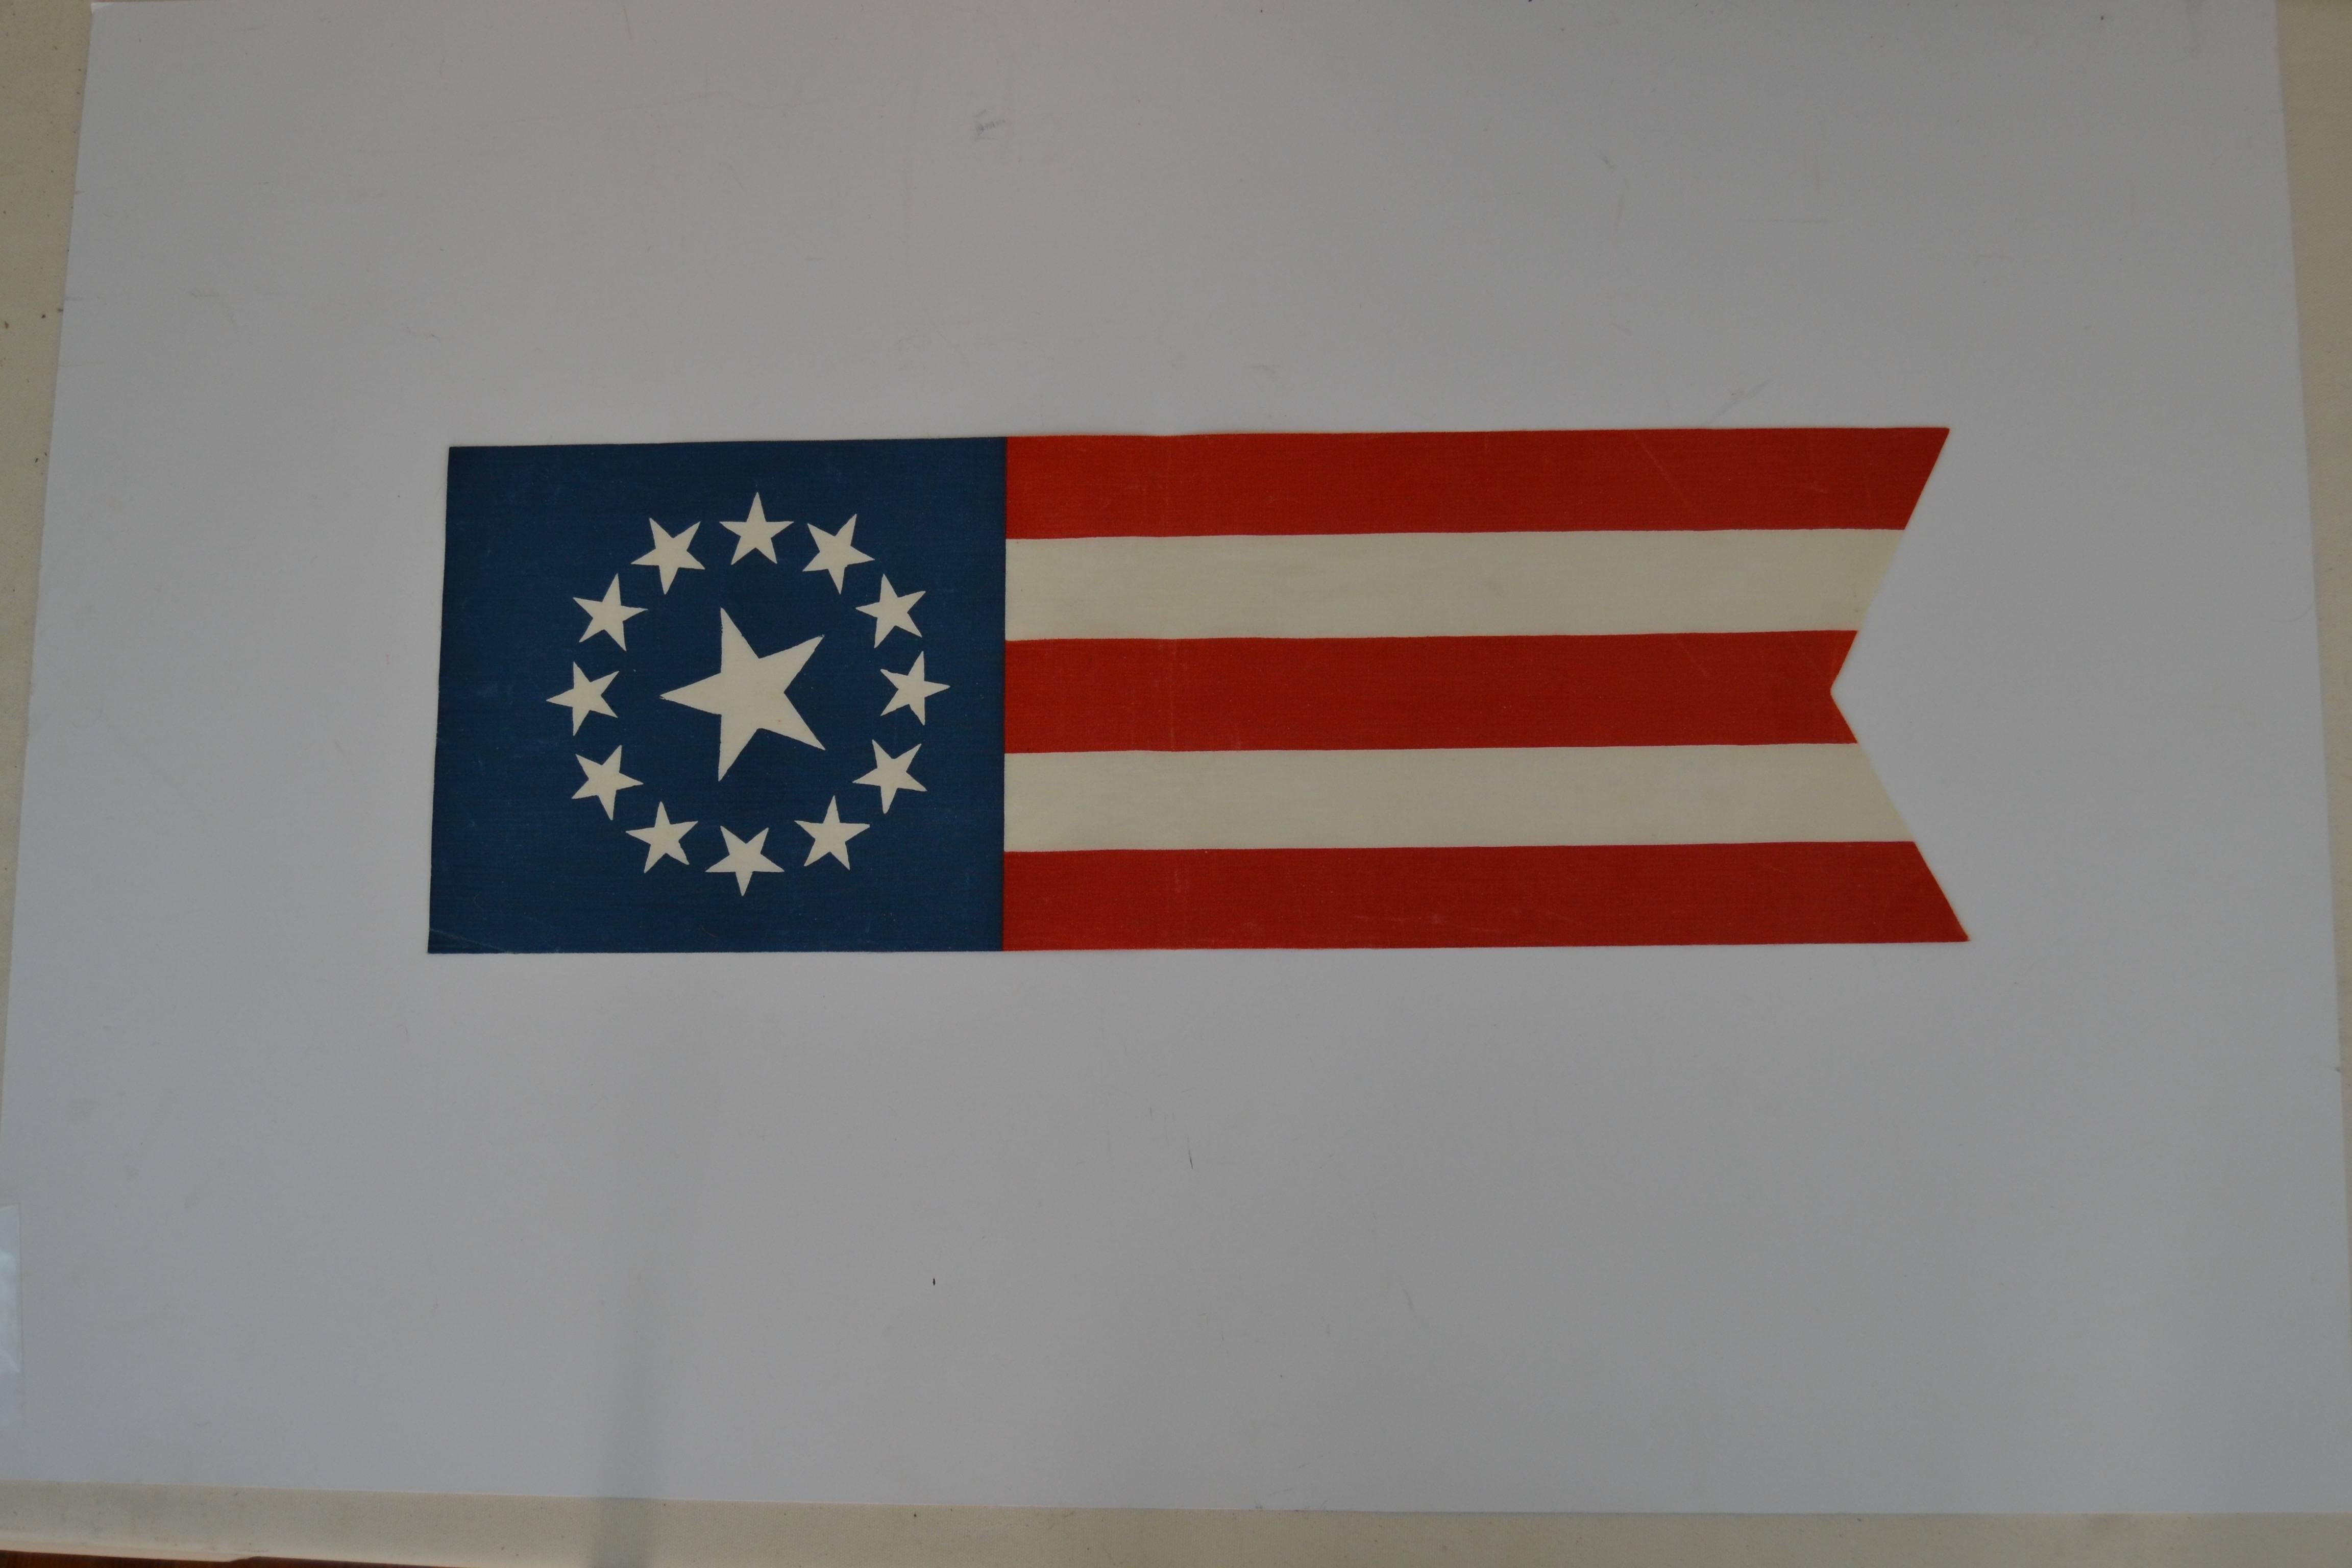 Printed patriotic banner on a glazed cotton fabric. swallow tailed with the star's in the Cowpens pattern, bright unused condition. Unframed.